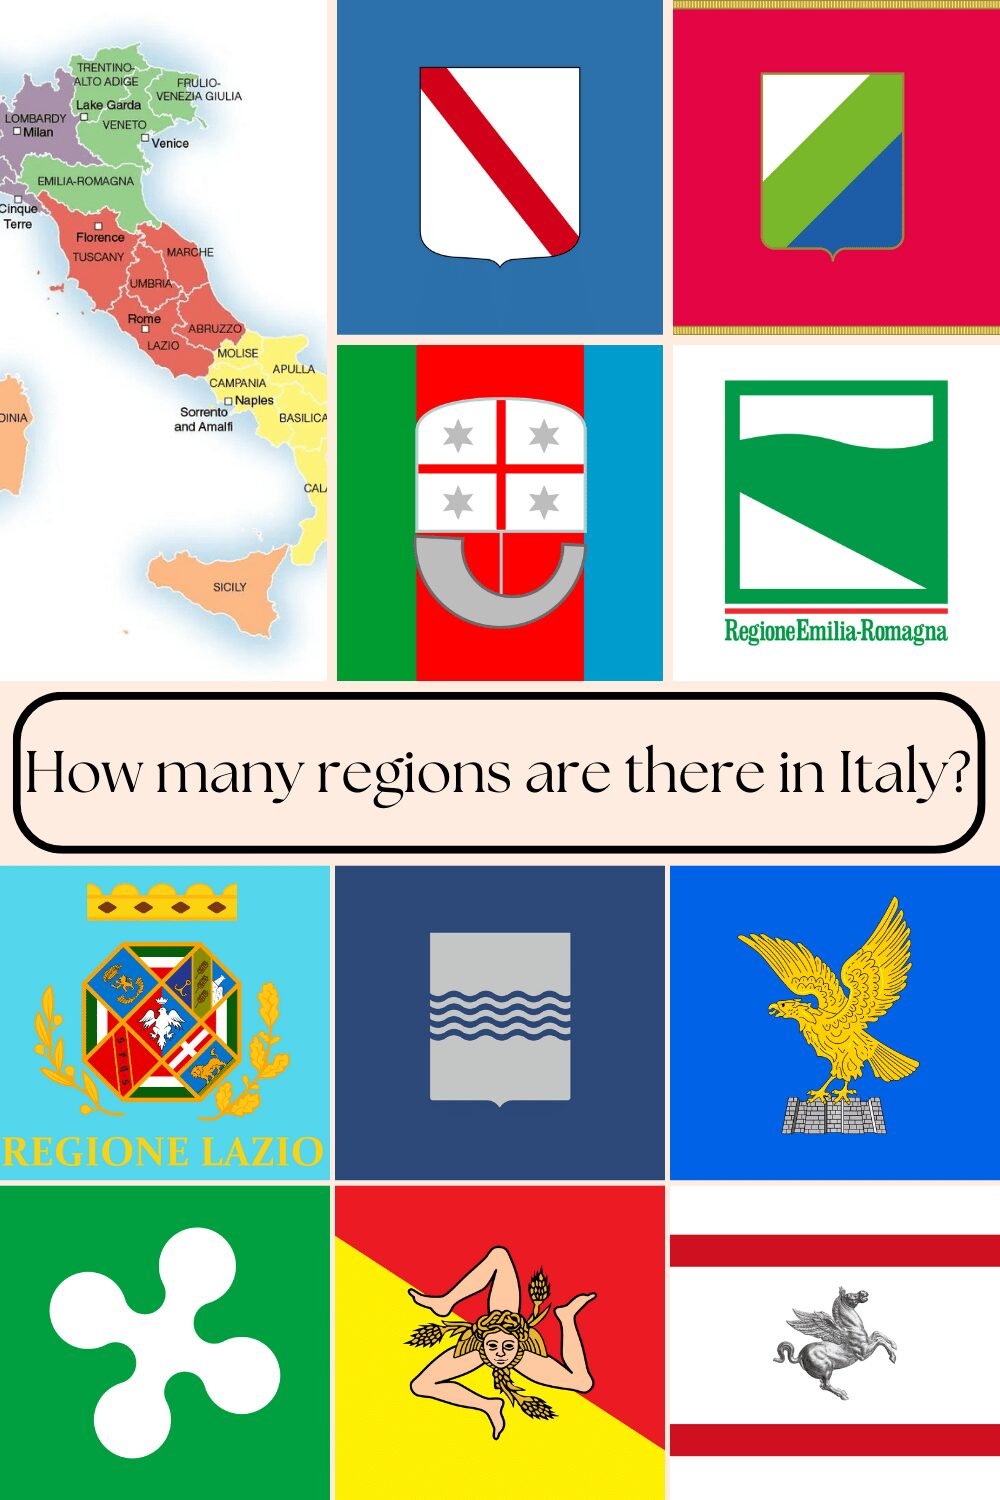 How many regions are there in italy?